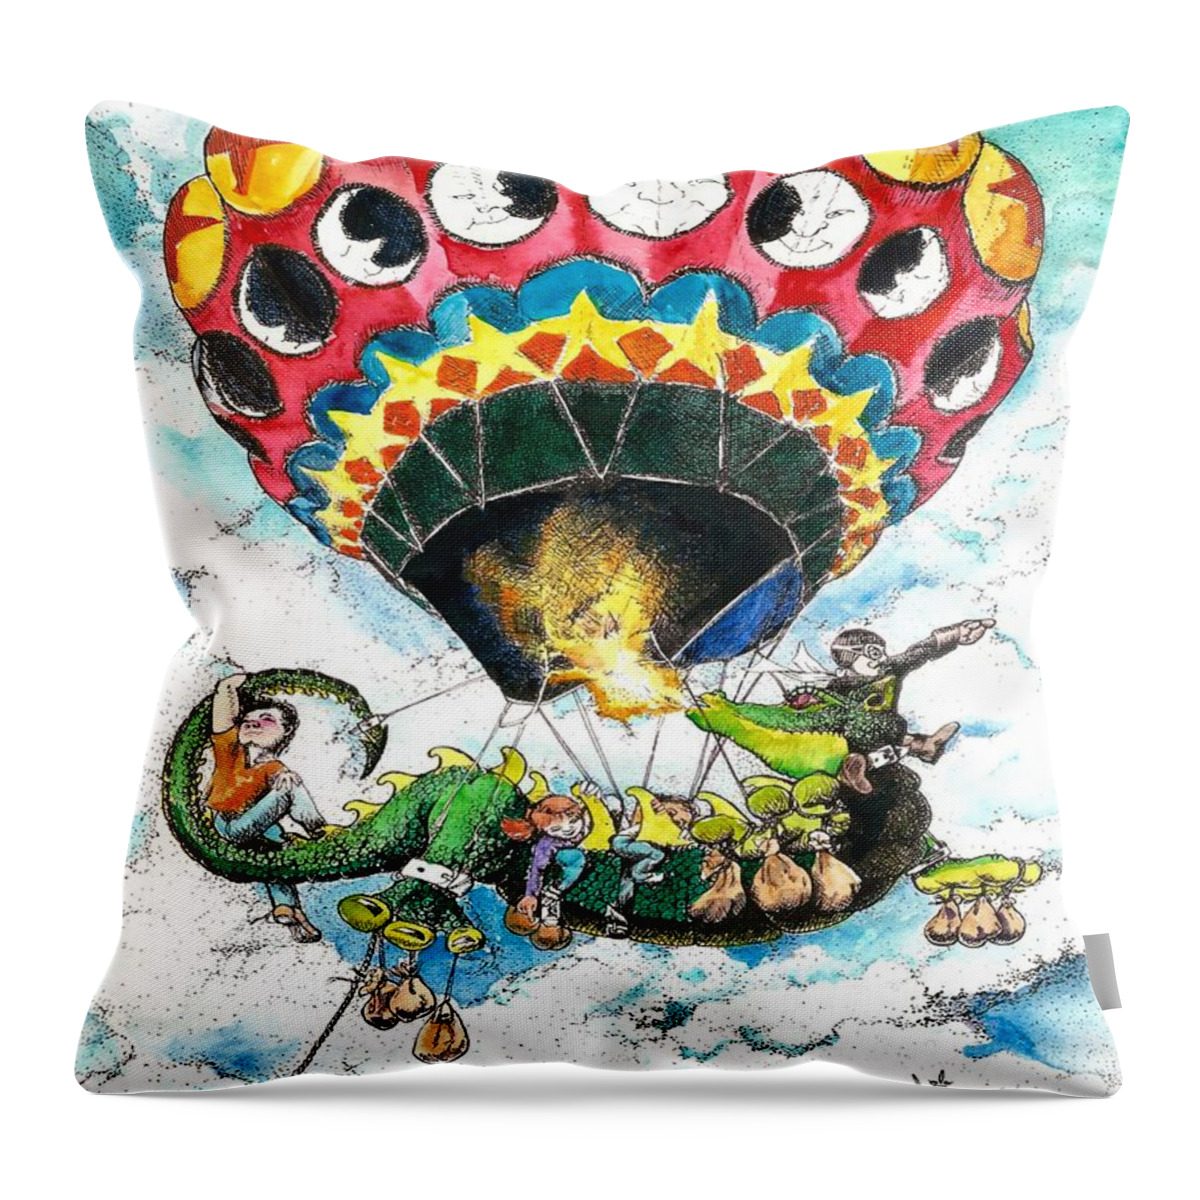 Pen And Ink Throw Pillow featuring the painting Montgolfiere Dragon by Merana Cadorette